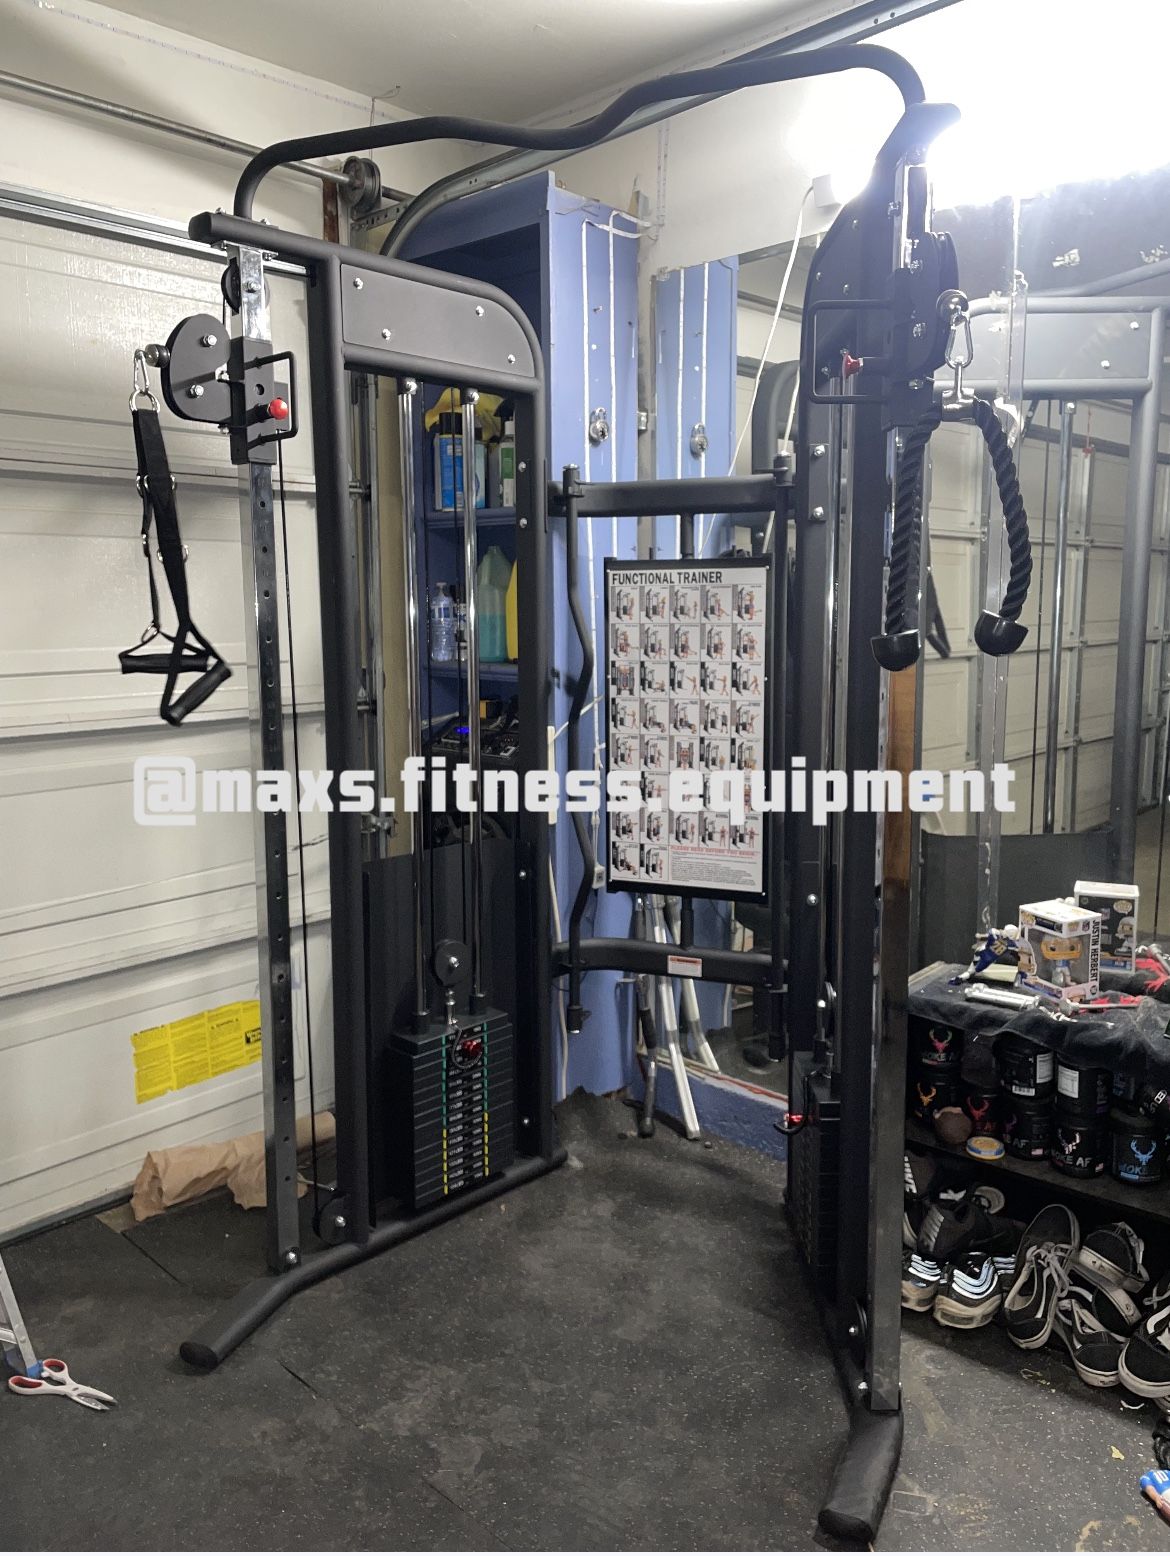 NEW EXERCISE CABLE MACHINE - ATTACHMENTS INCLUDED 